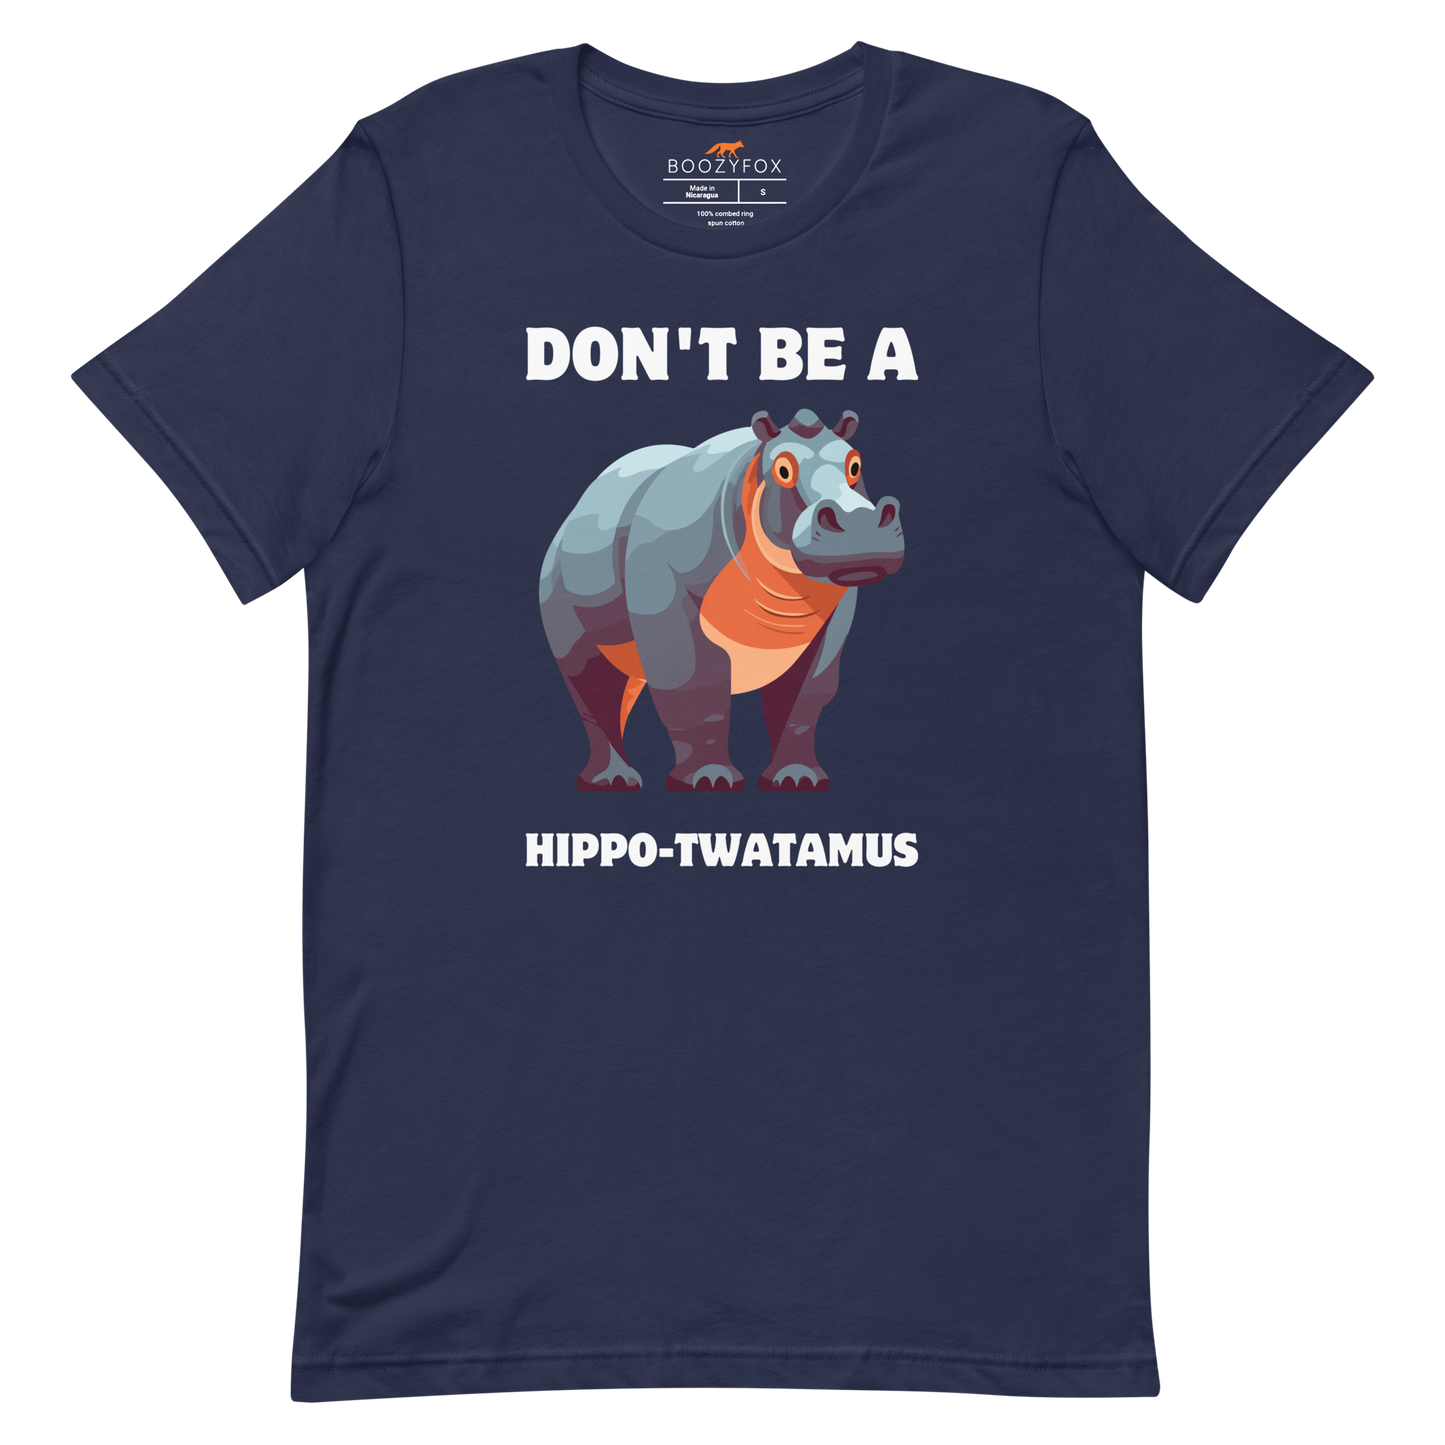 Navy Premium Hippo Tee featuring a Don't Be a Hippo-Twatamus graphic on the chest - Funny Graphic Hippo Tees - Boozy Fox